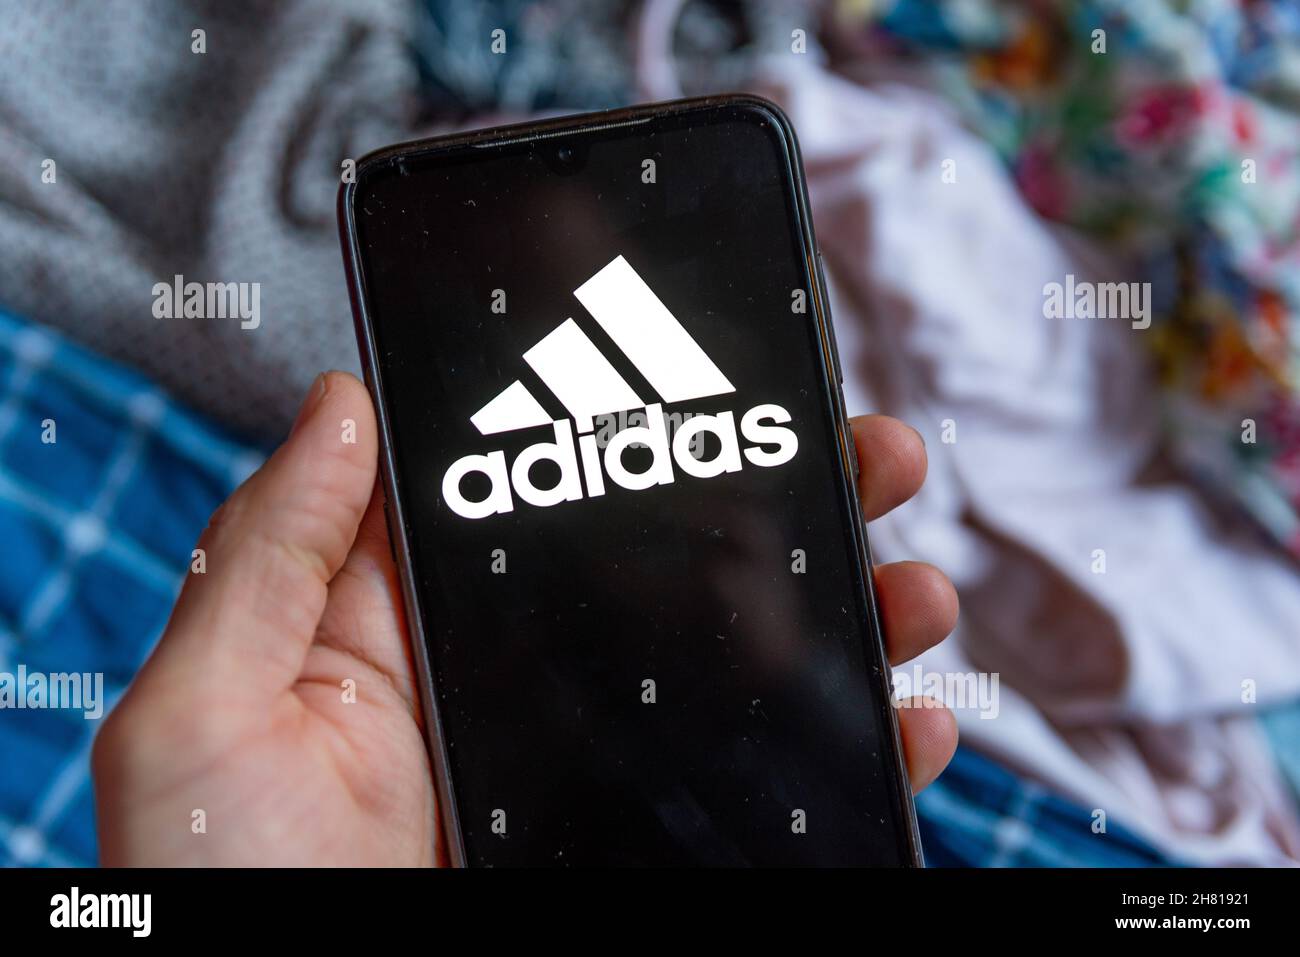 Spain. 26th Nov, 2021. The fashion retailer Adidas mobile app logo is seen on screen of a mobile phone in Barcelona, Spain on November 26, 2021. Online shopping is very popular